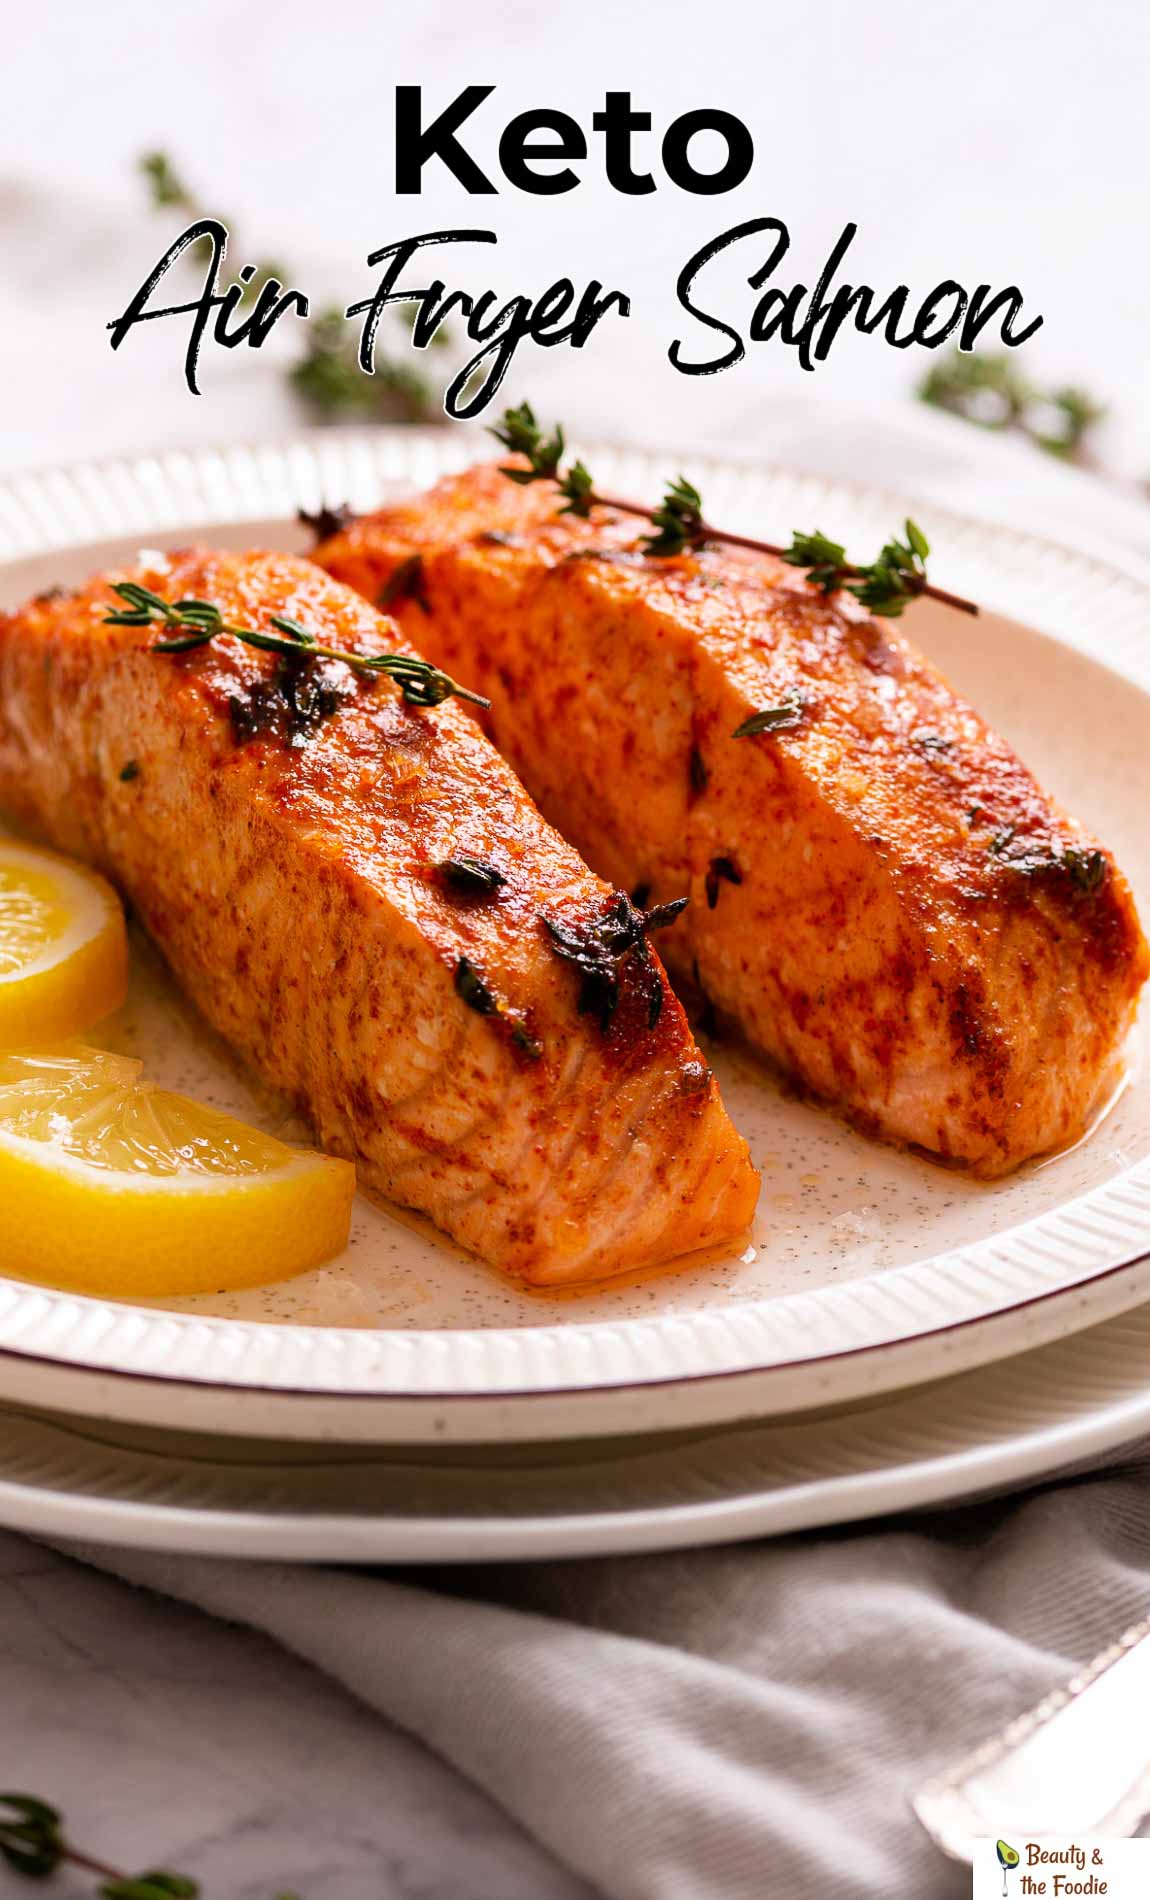 Two air fried salmon fillets on a white plate garnished with lemon slices and thyme leaves.